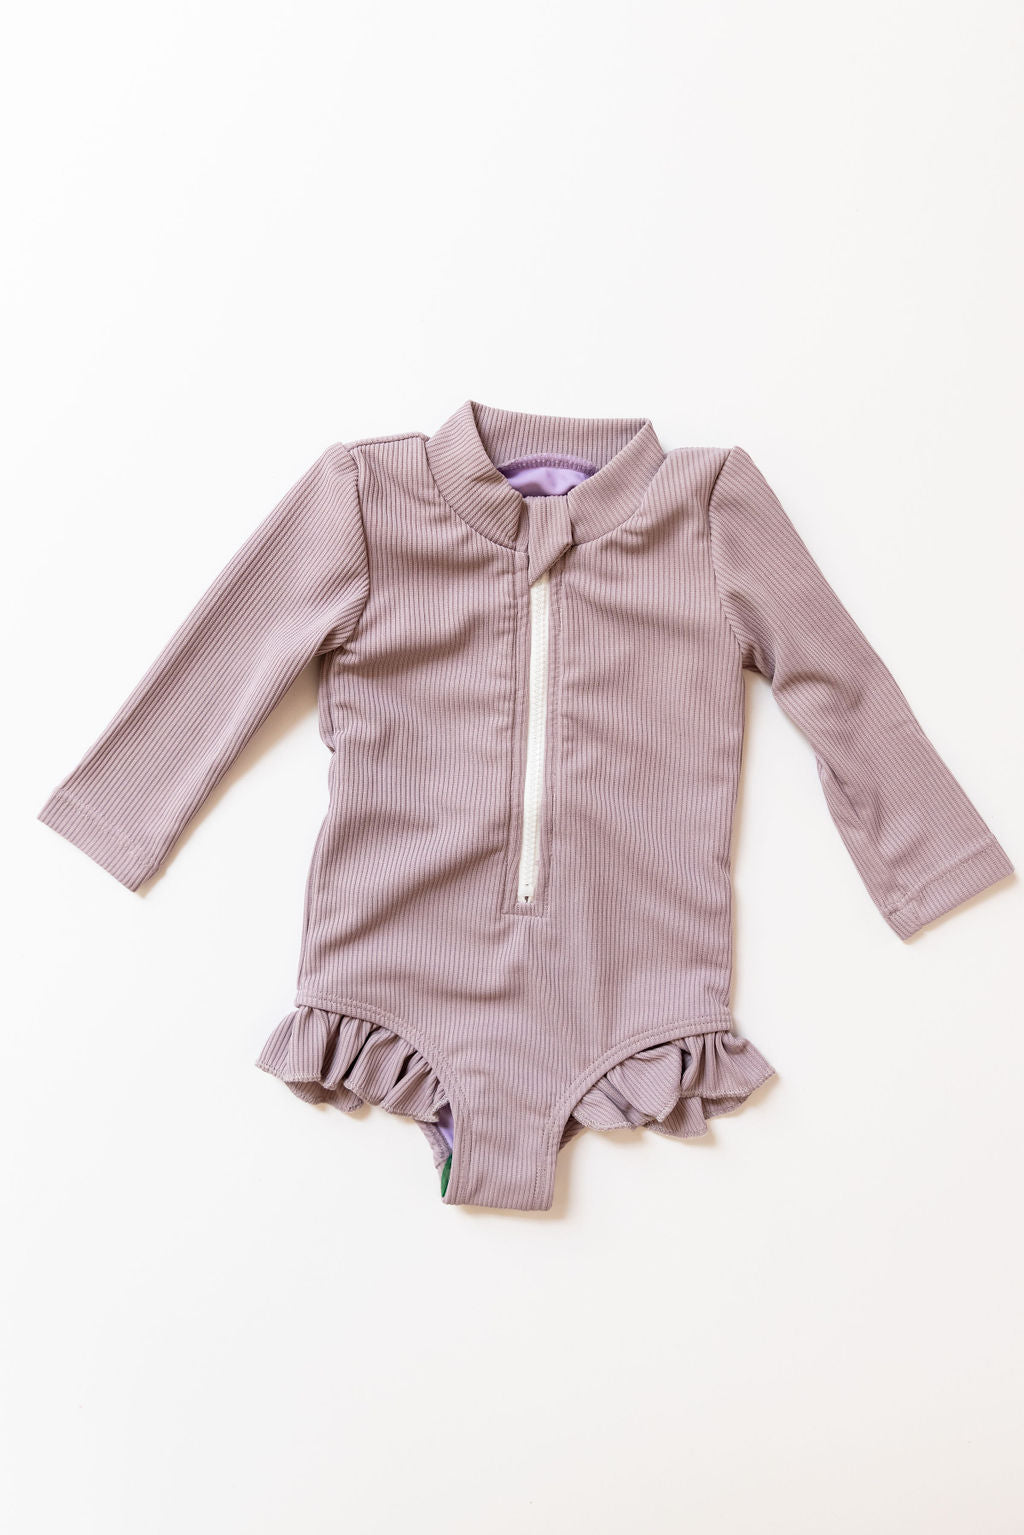 Sahara Ribbed Zip Up One Piece In Lavender